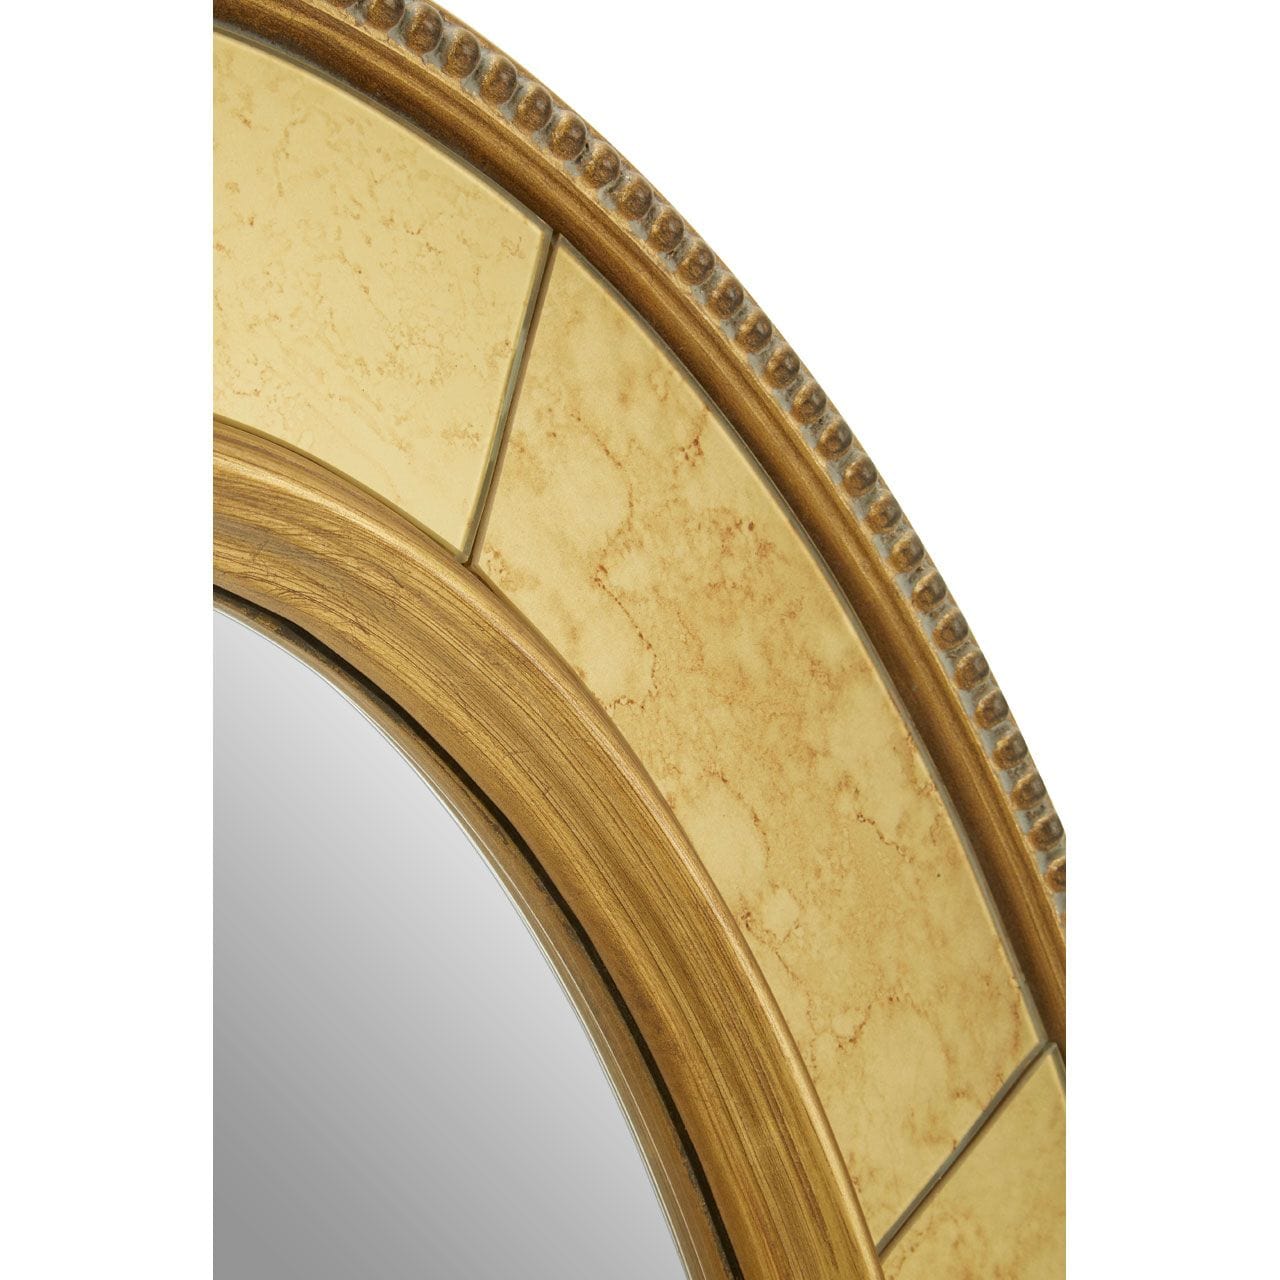 Noosa & Co. Mirrors Gambit Oval Wall Mirror House of Isabella UK